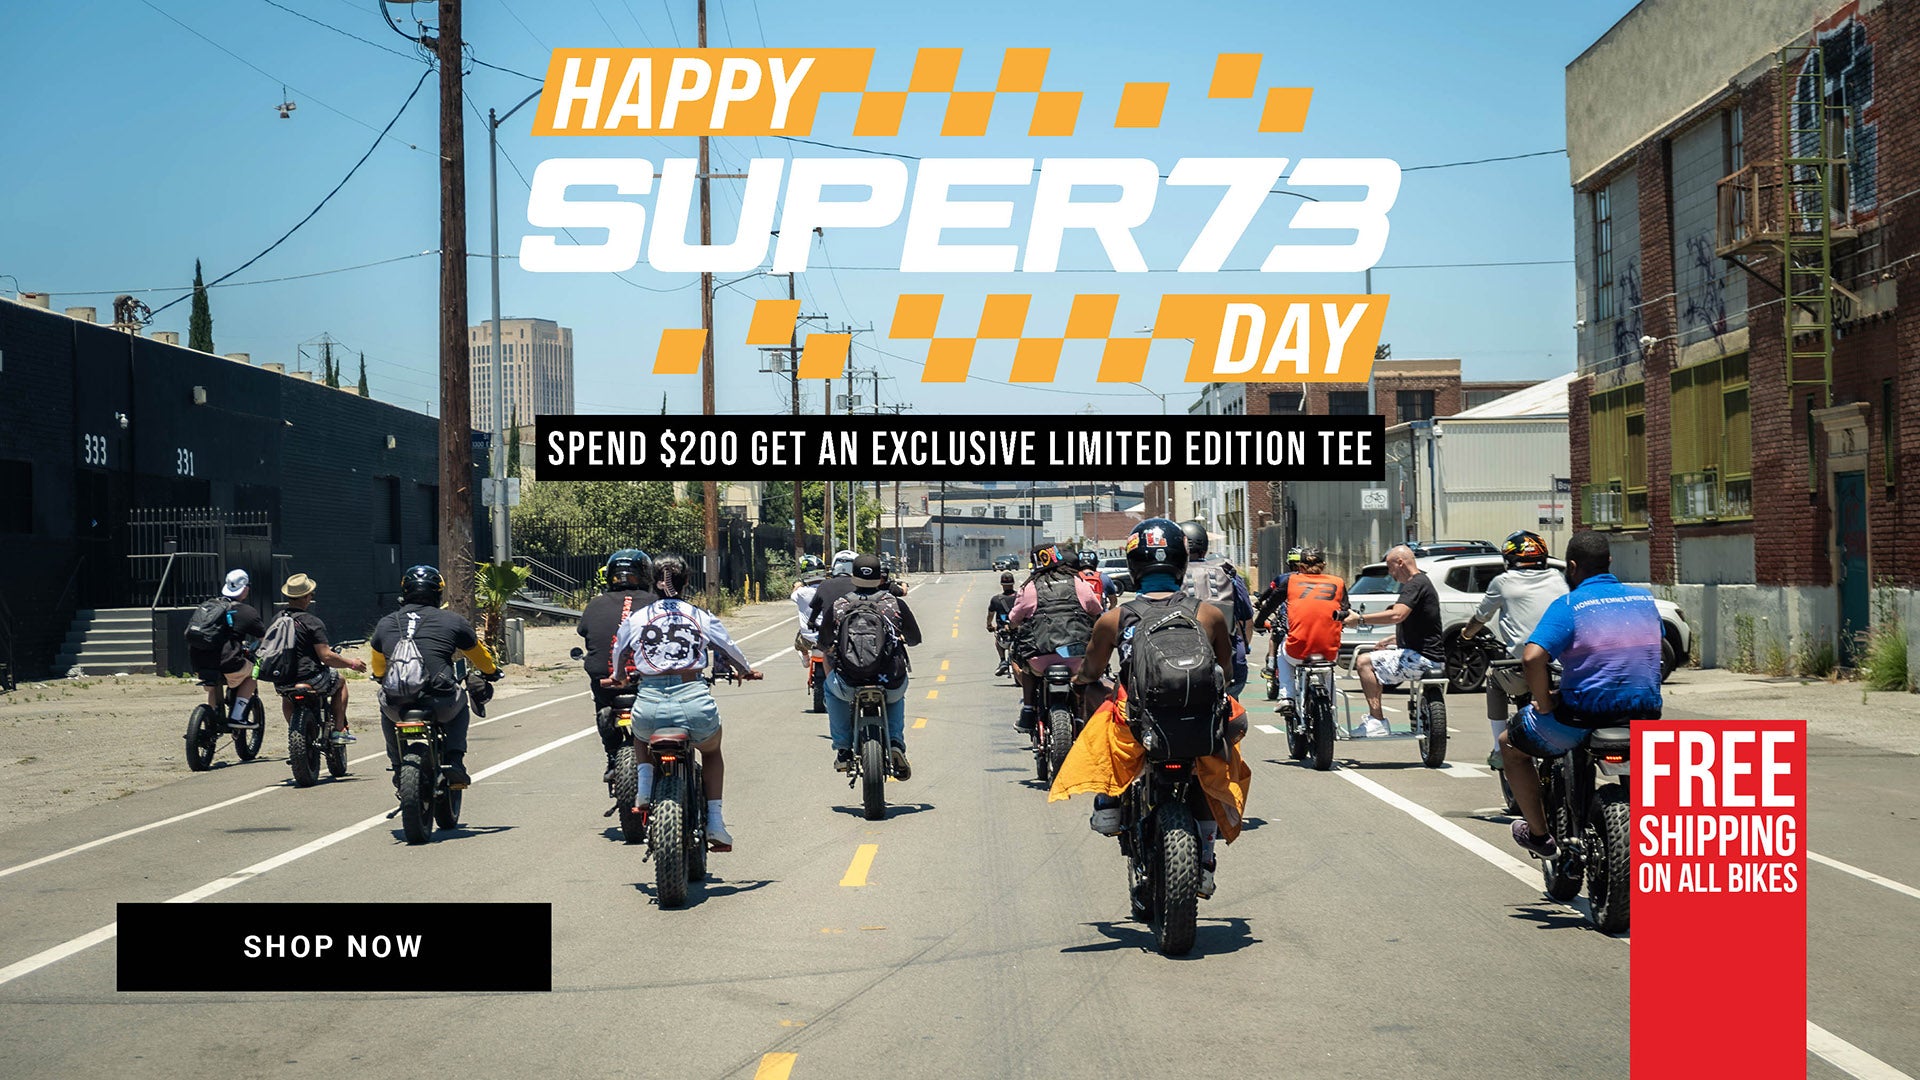 celebrate SUPER73 day with a free gift with purchase of $200 and free shipping on all bikes